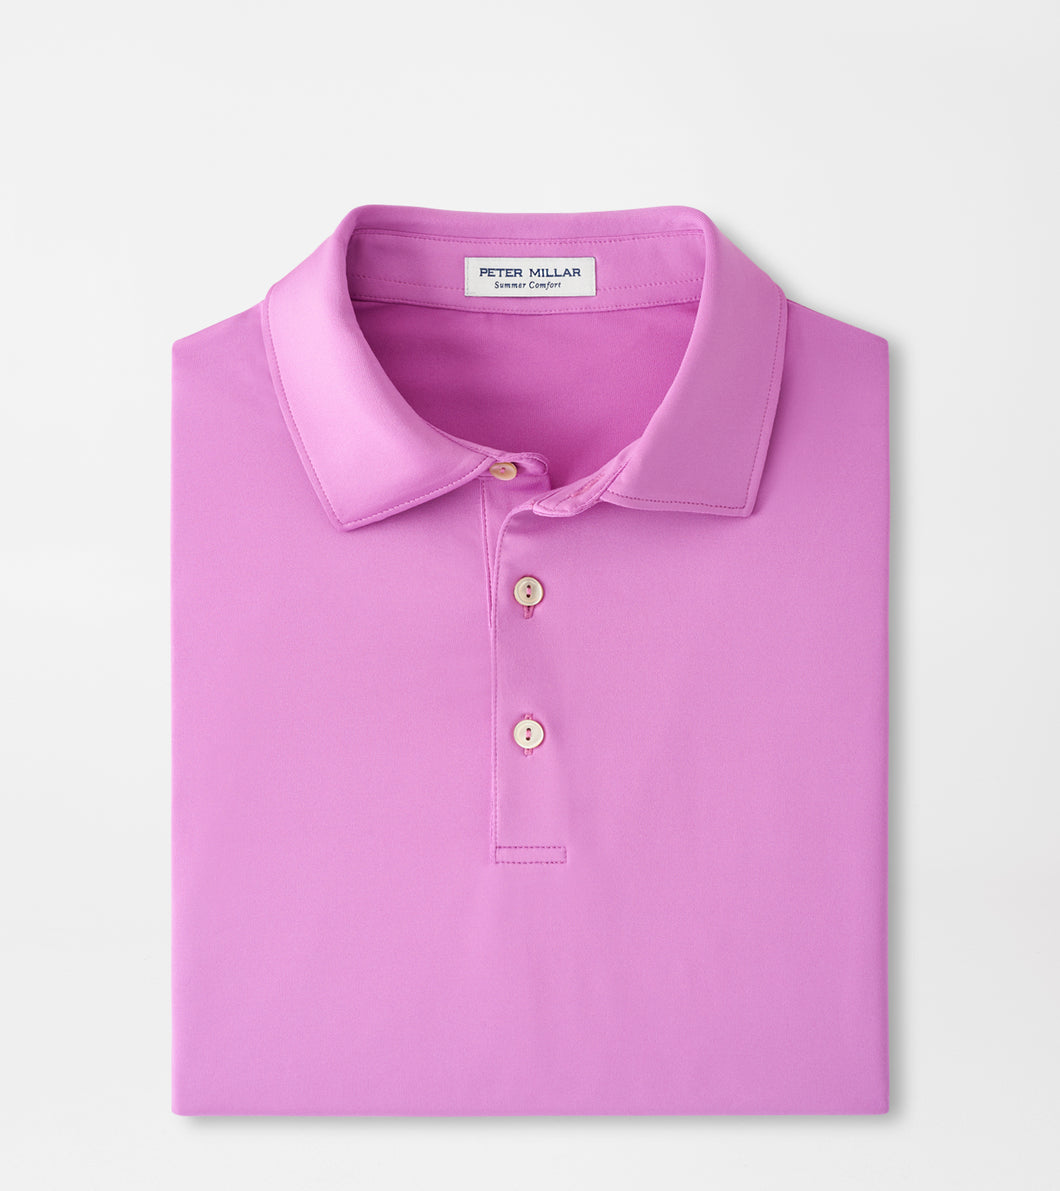 Peter Millar Solid Performance Jersey Polo in Oleander